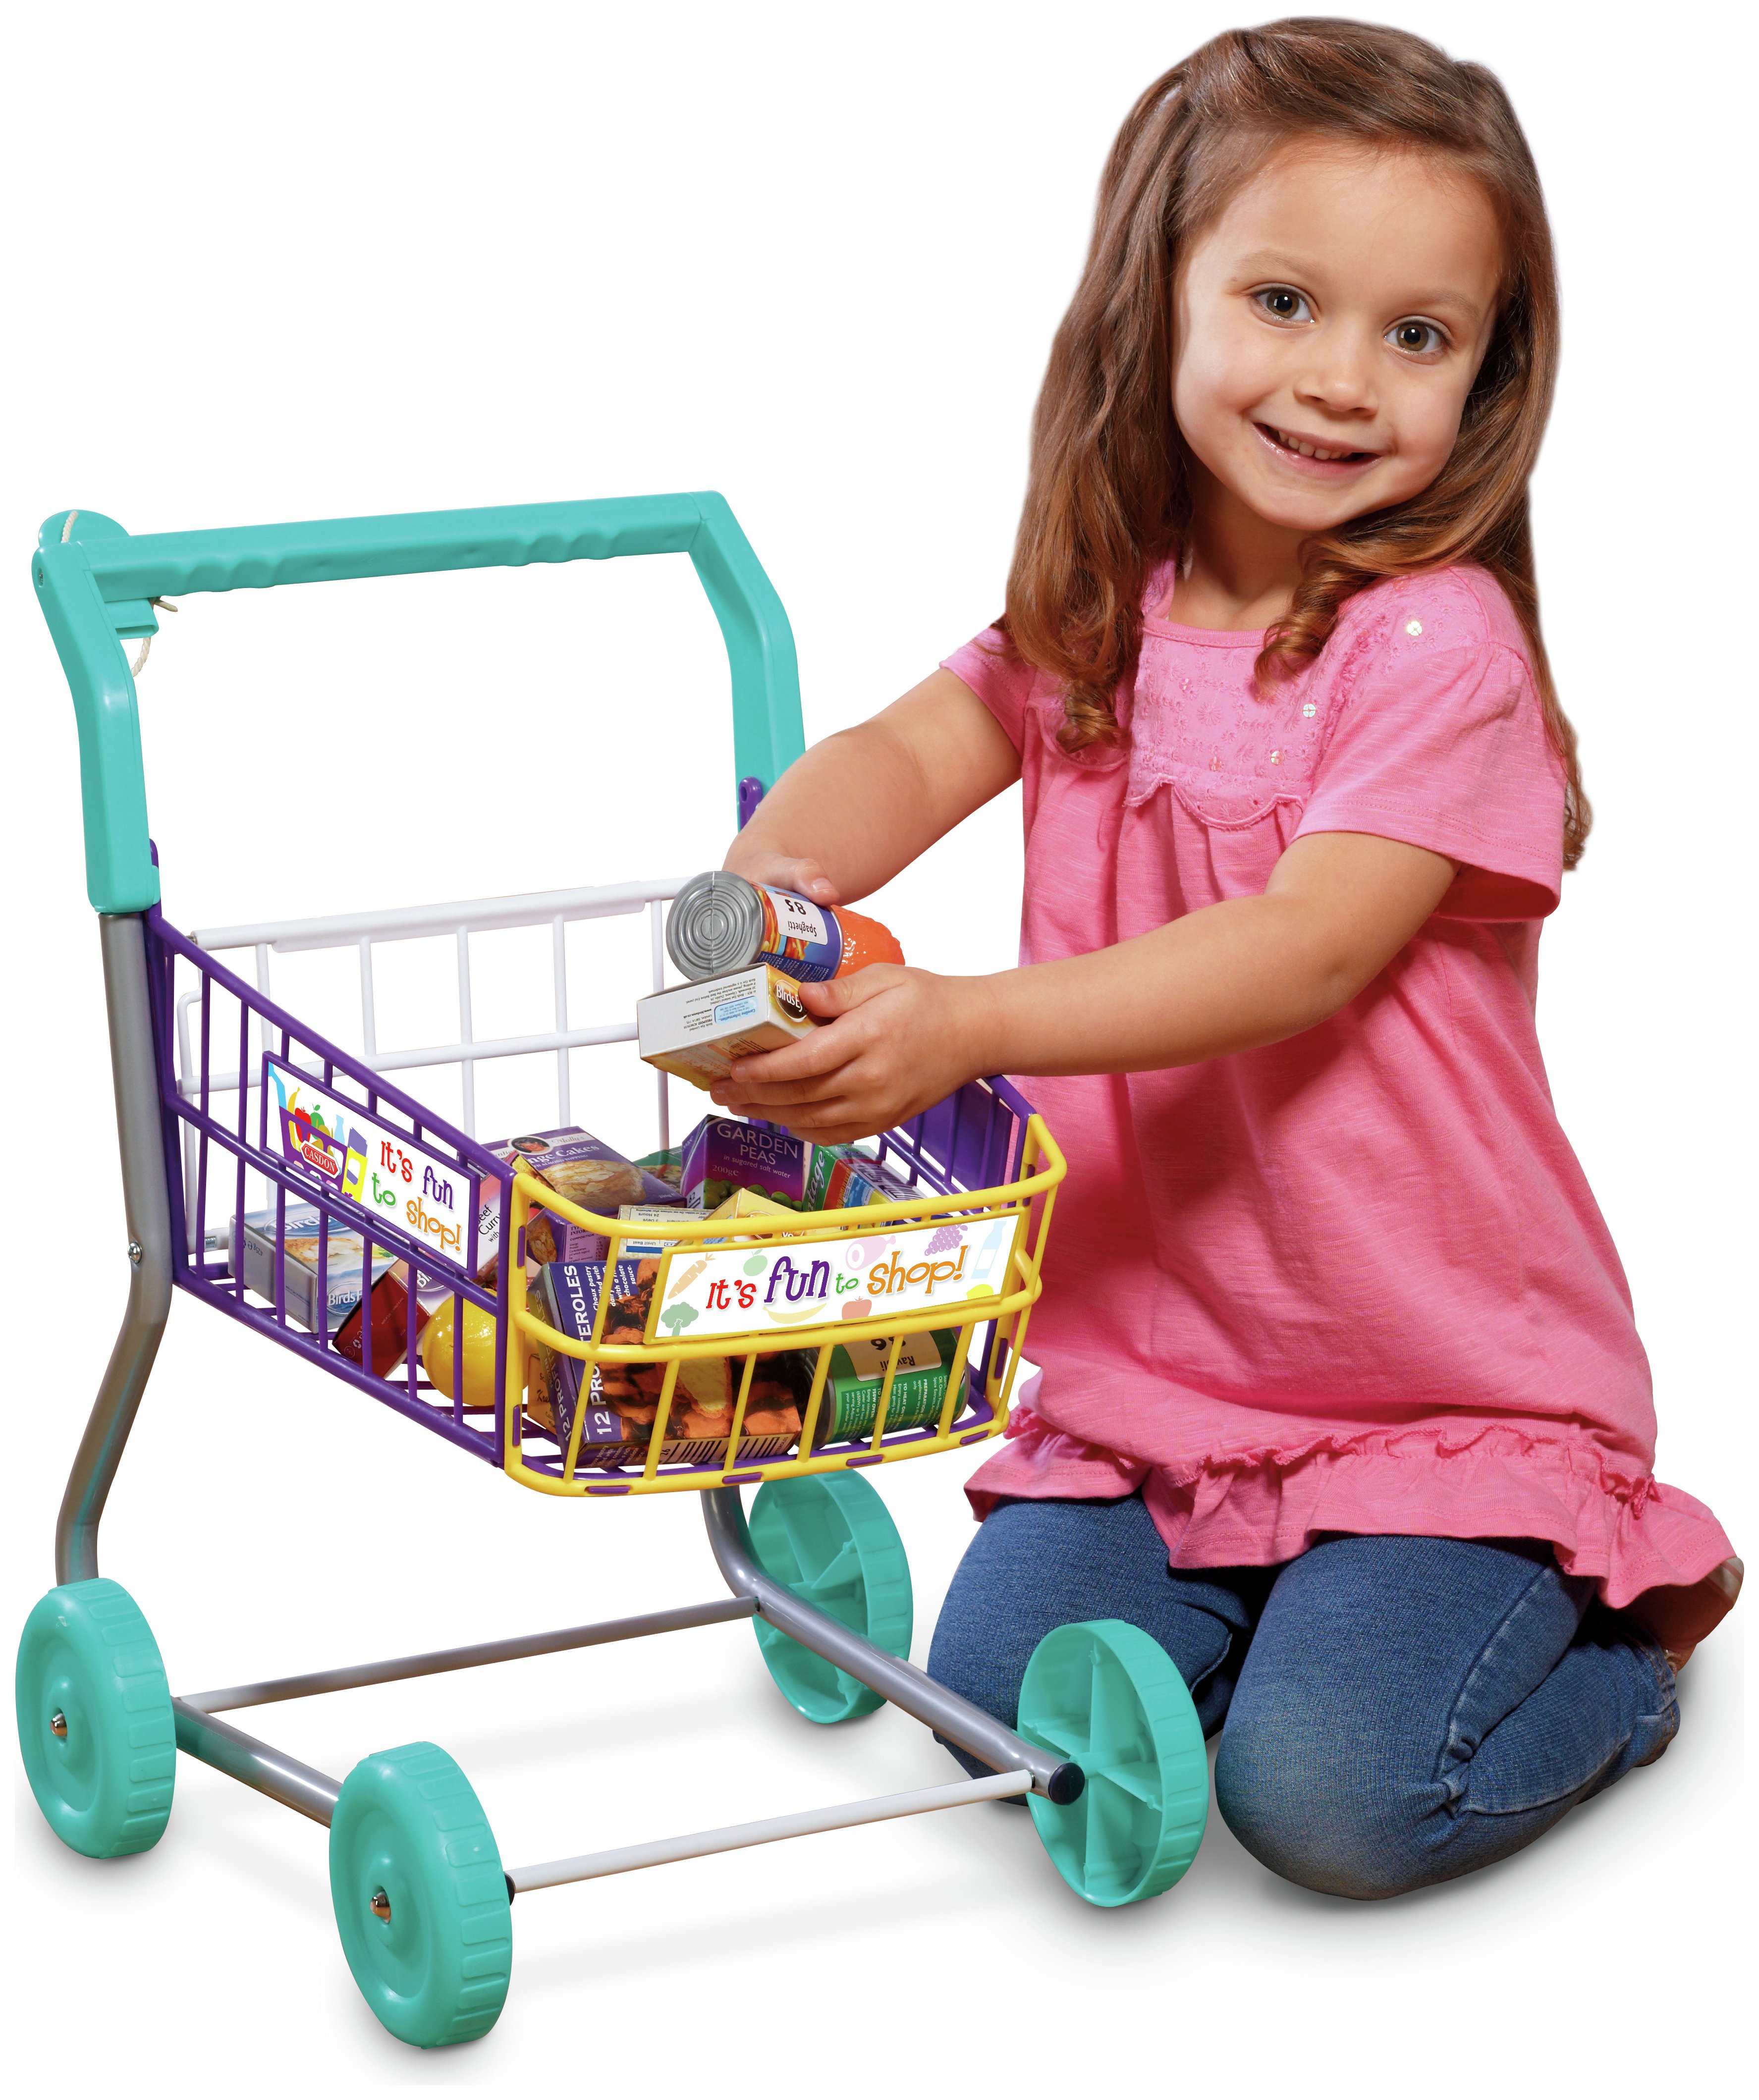 Role Play Child's Shopping Trolley. Review